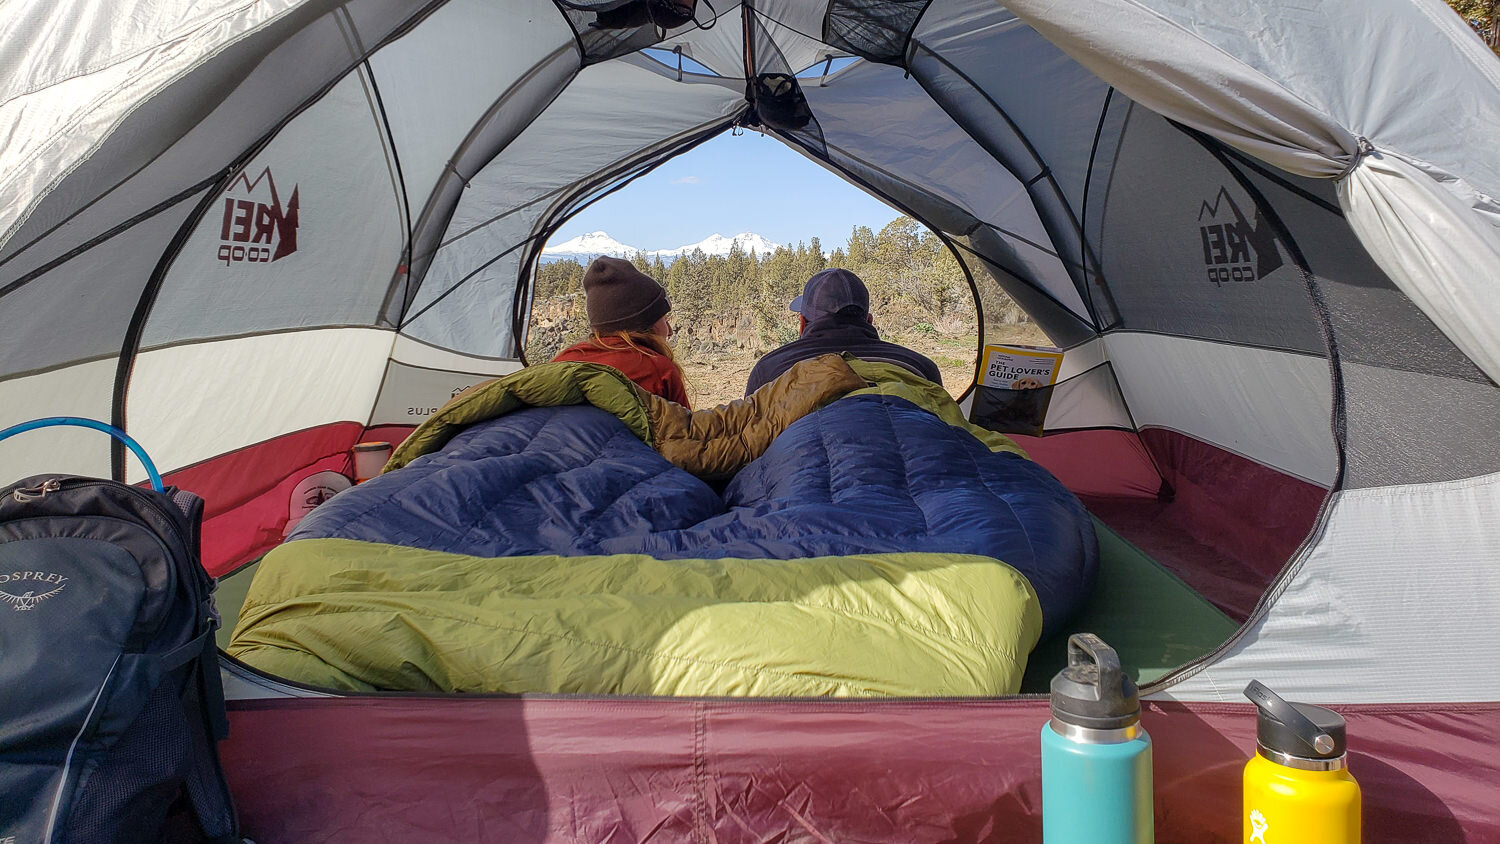 16 Backyard Camping Essentials For When You Don't Want To Leave